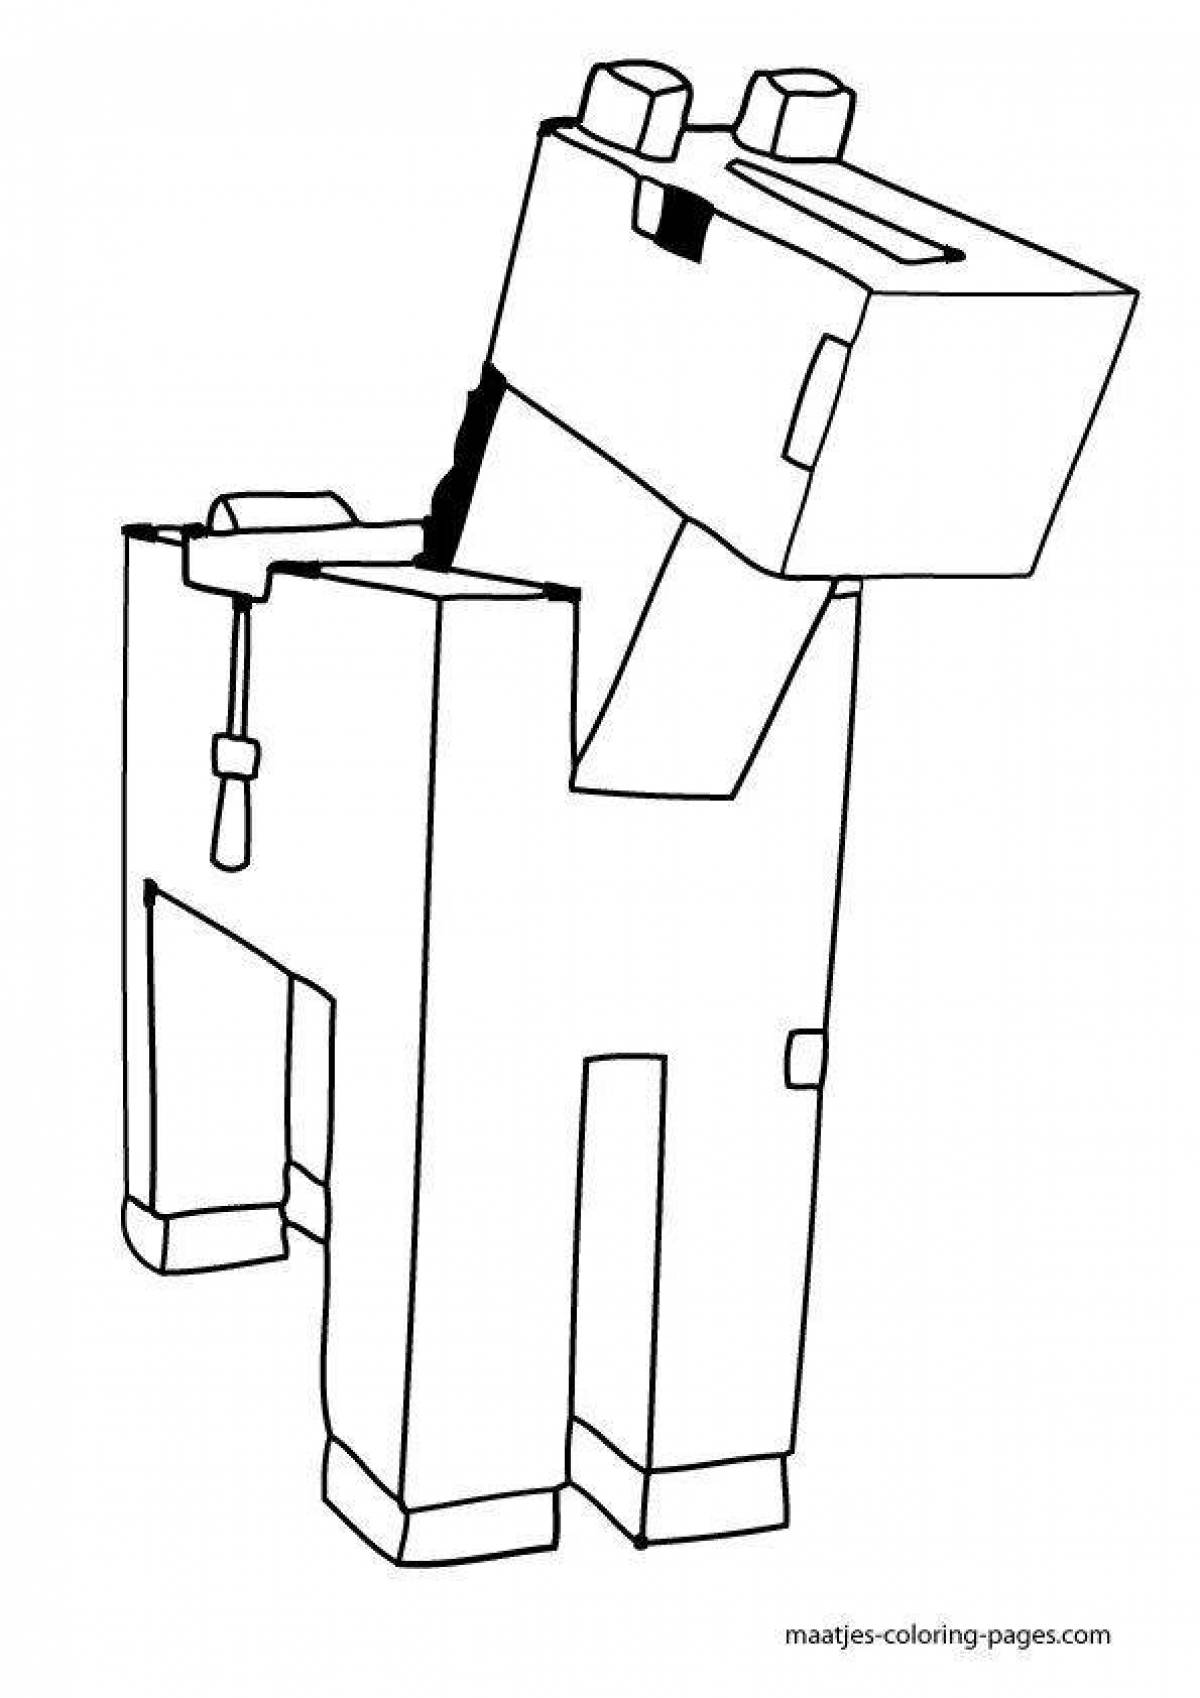 Awesome minecraft golem coloring page